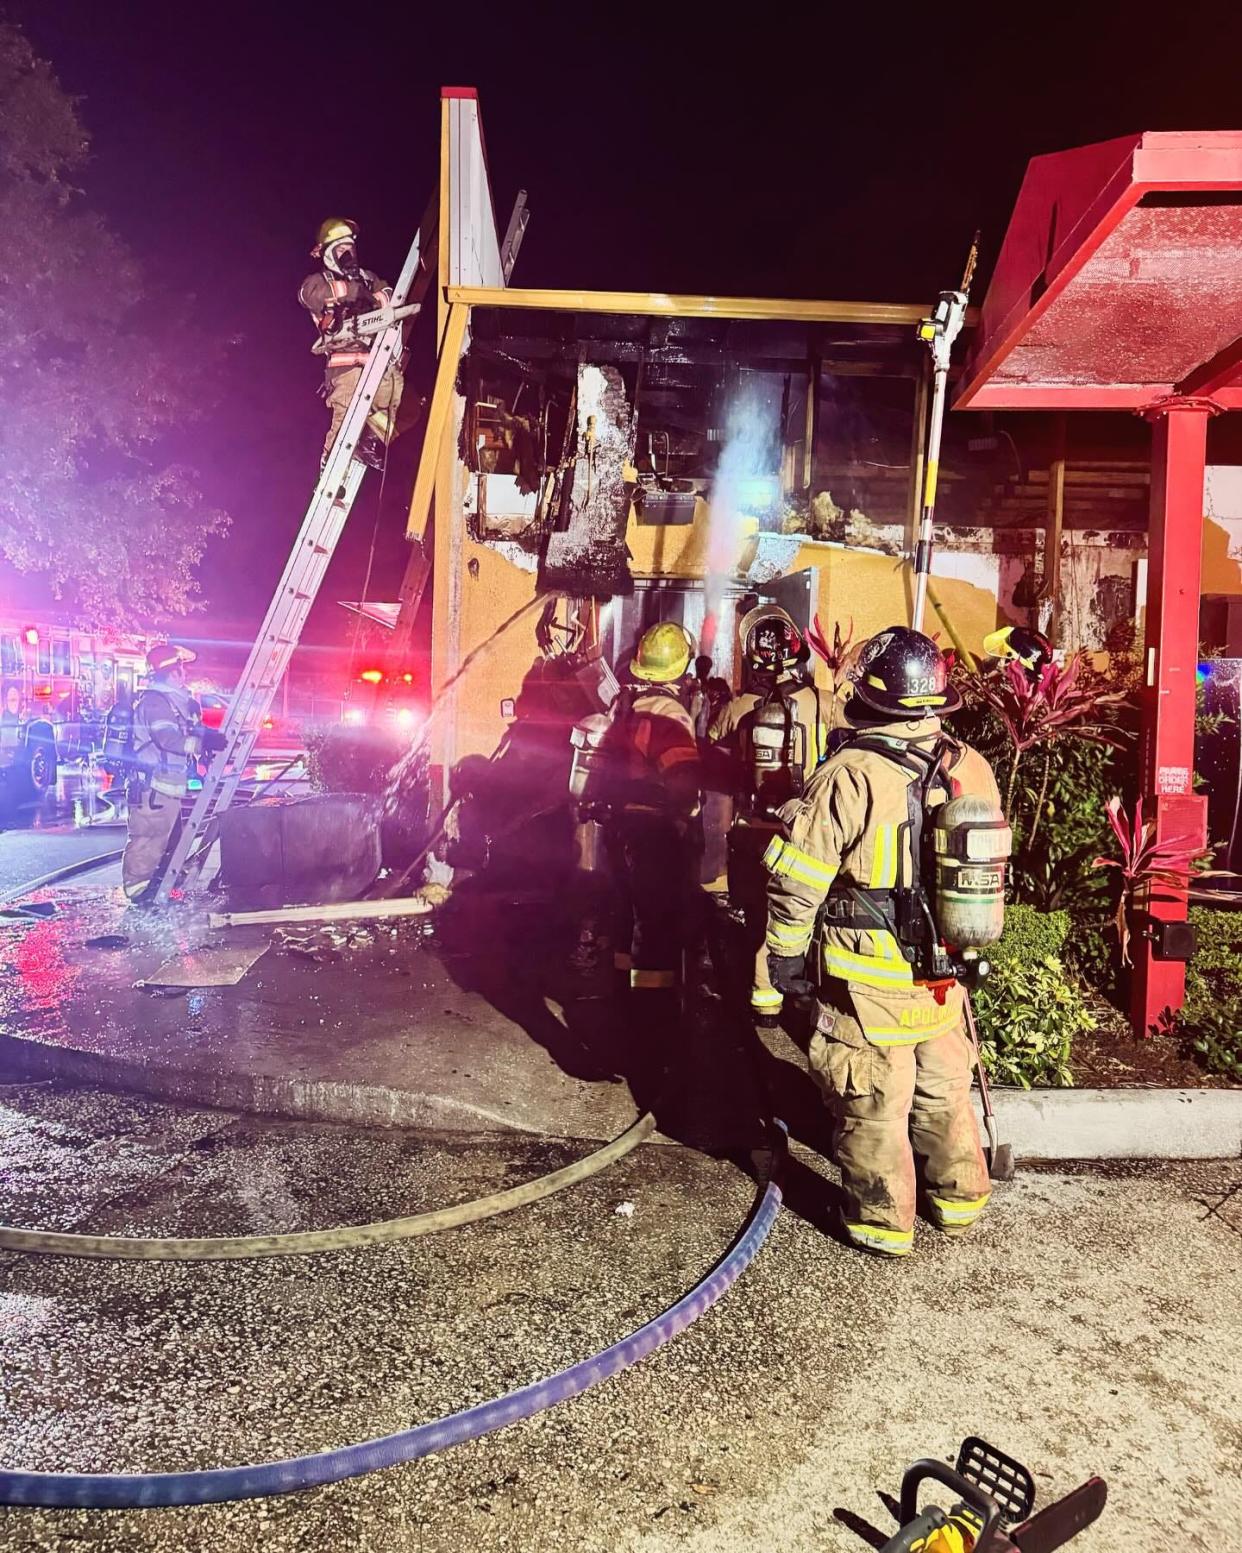 Lakeland firefighters had to force their way into Popeyes Louisiana Kitchen, off U.S. Highway 98, early Thursday morning to battle a fire in the restaurant's walls and attic. The cause is currently unknown.